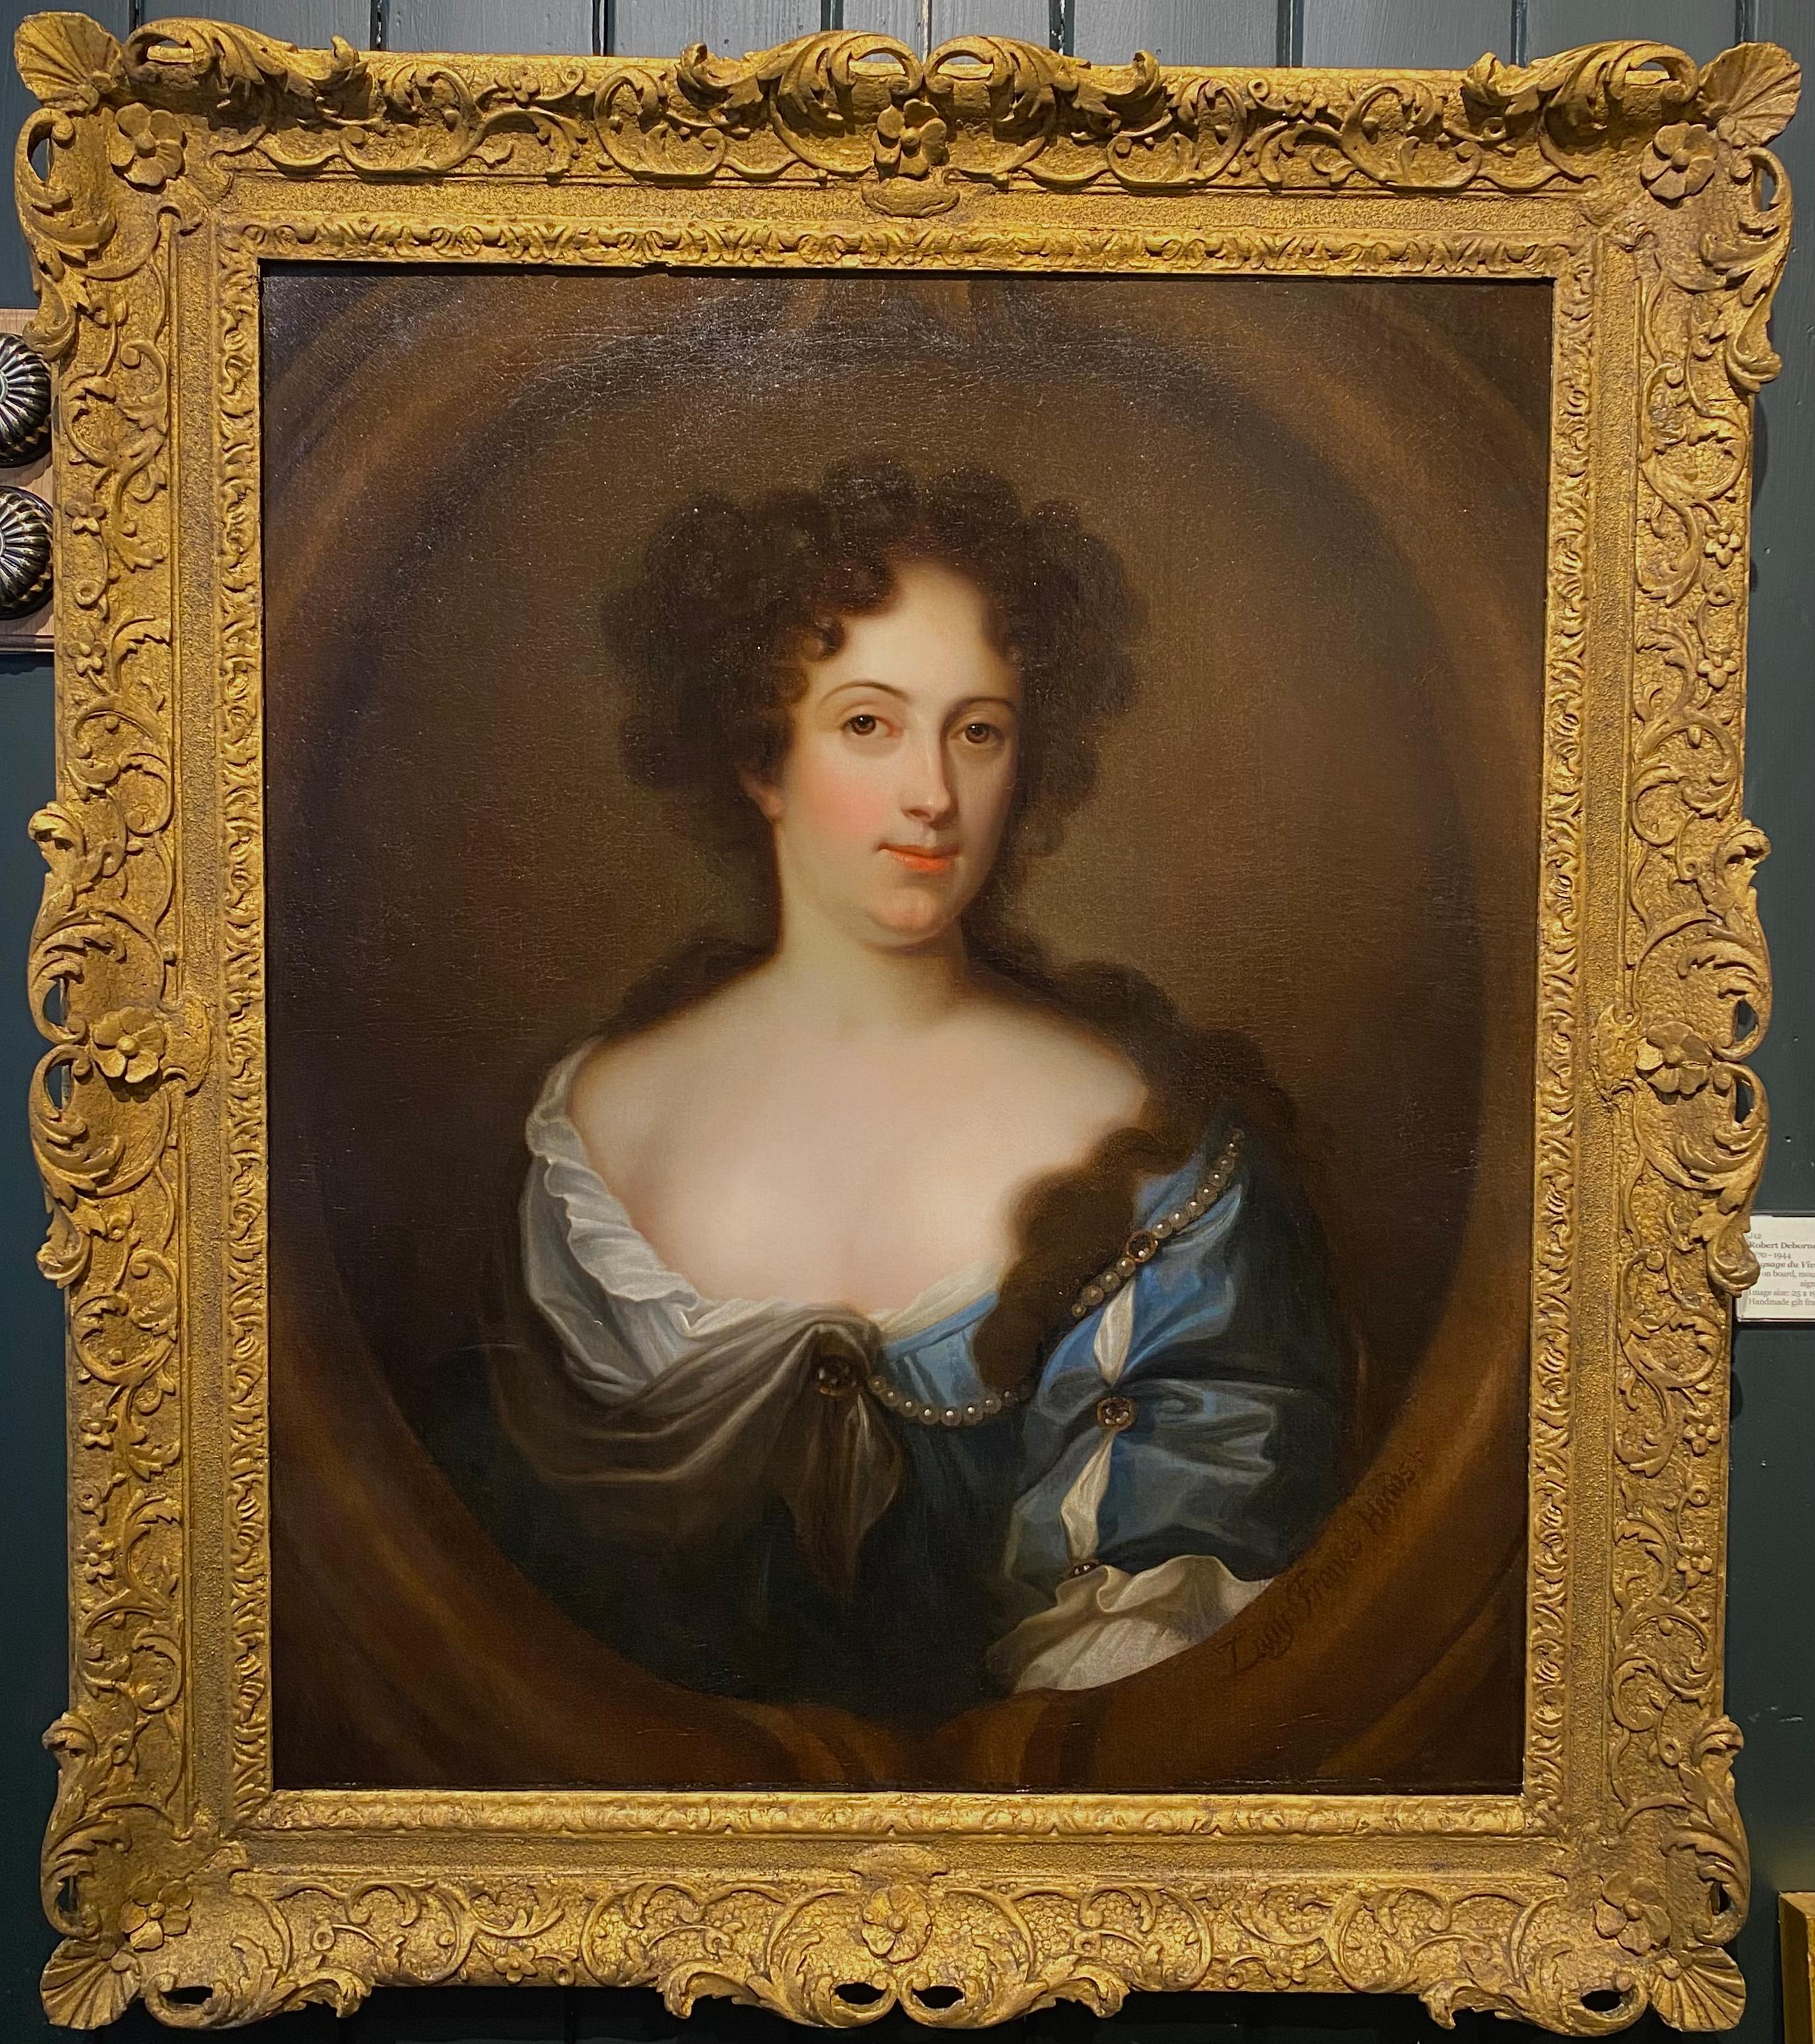 William Wissing
1656-1687
Portrait of Lady Frances Hends
Oil on canvas
Image size: 25 1/4 x 30 1/4 inches (64 x 76.75 cm)
Carved gilt period frame


This is a head and shoulders portrait of a young woman painted with a plain background and